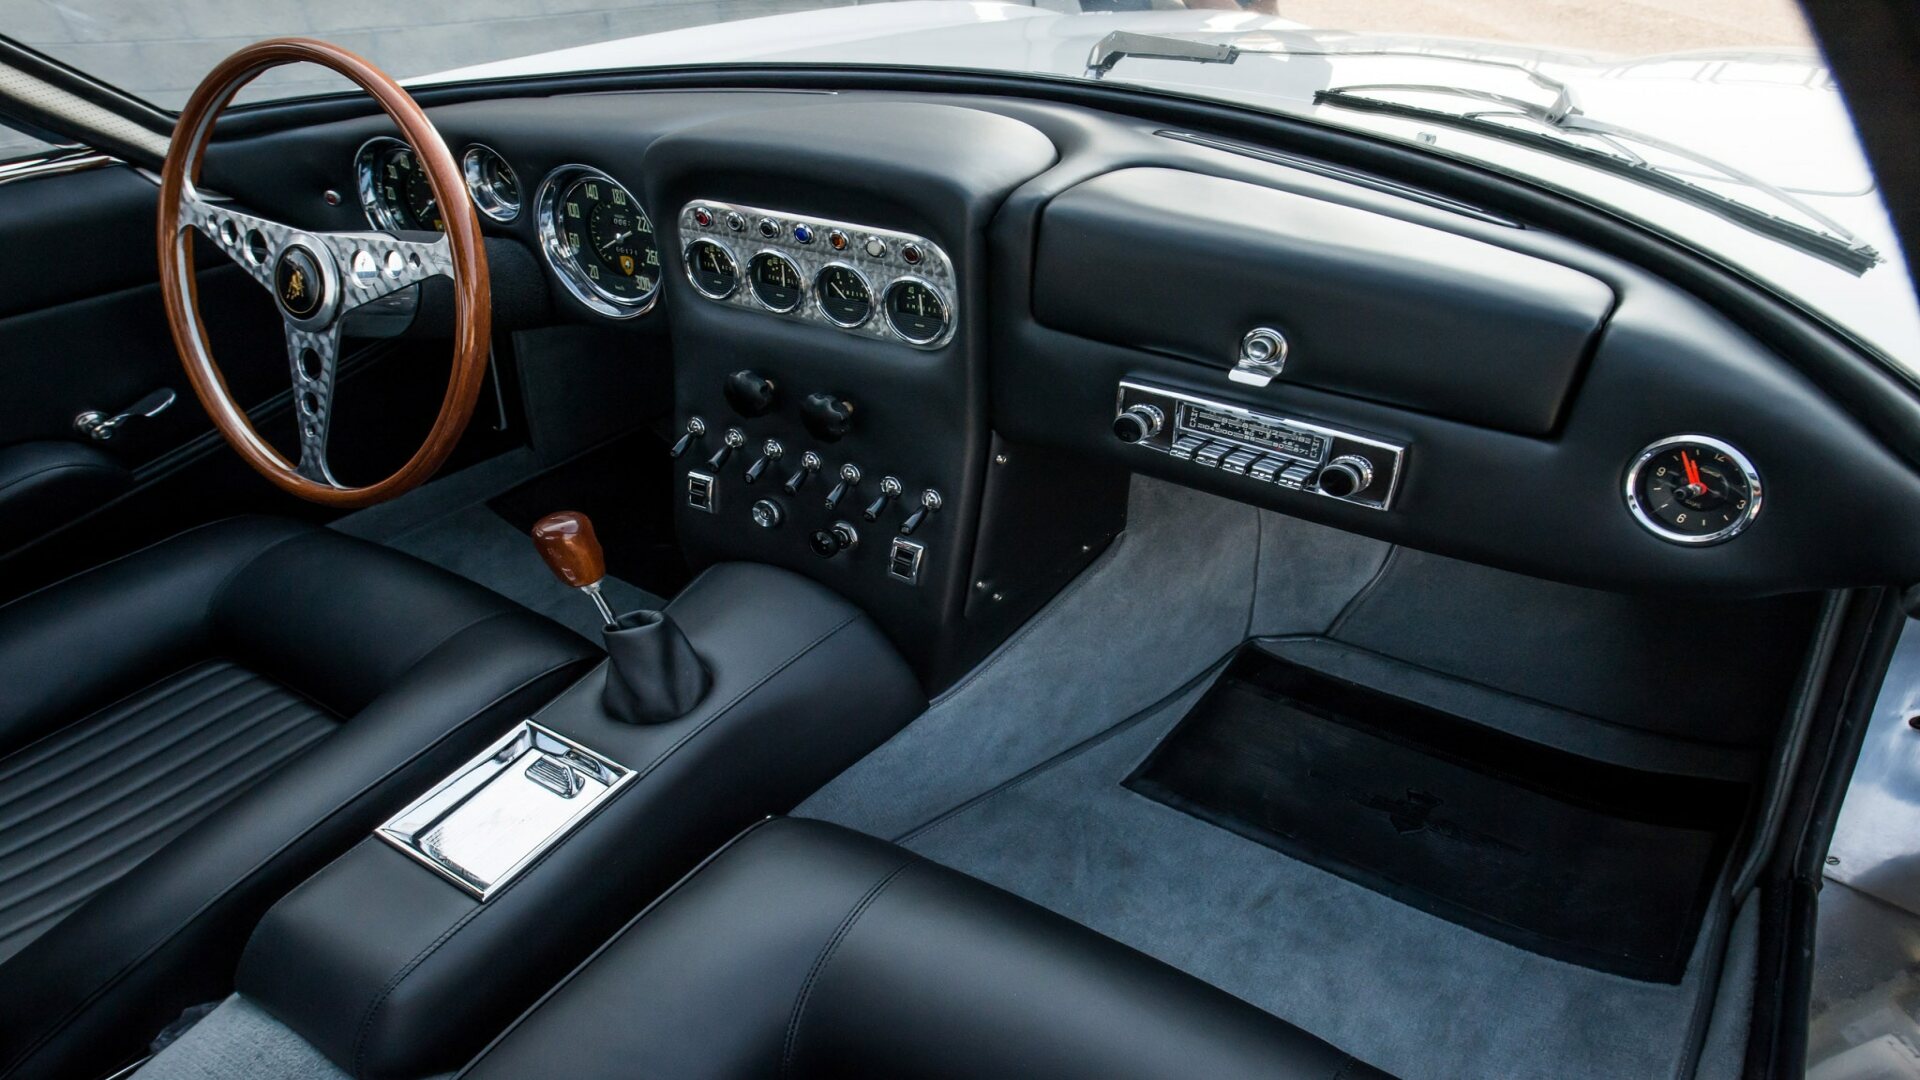 The Interior, Steering, Dashboard, And Central Console Of A 1964 Lamborghini 350 GT